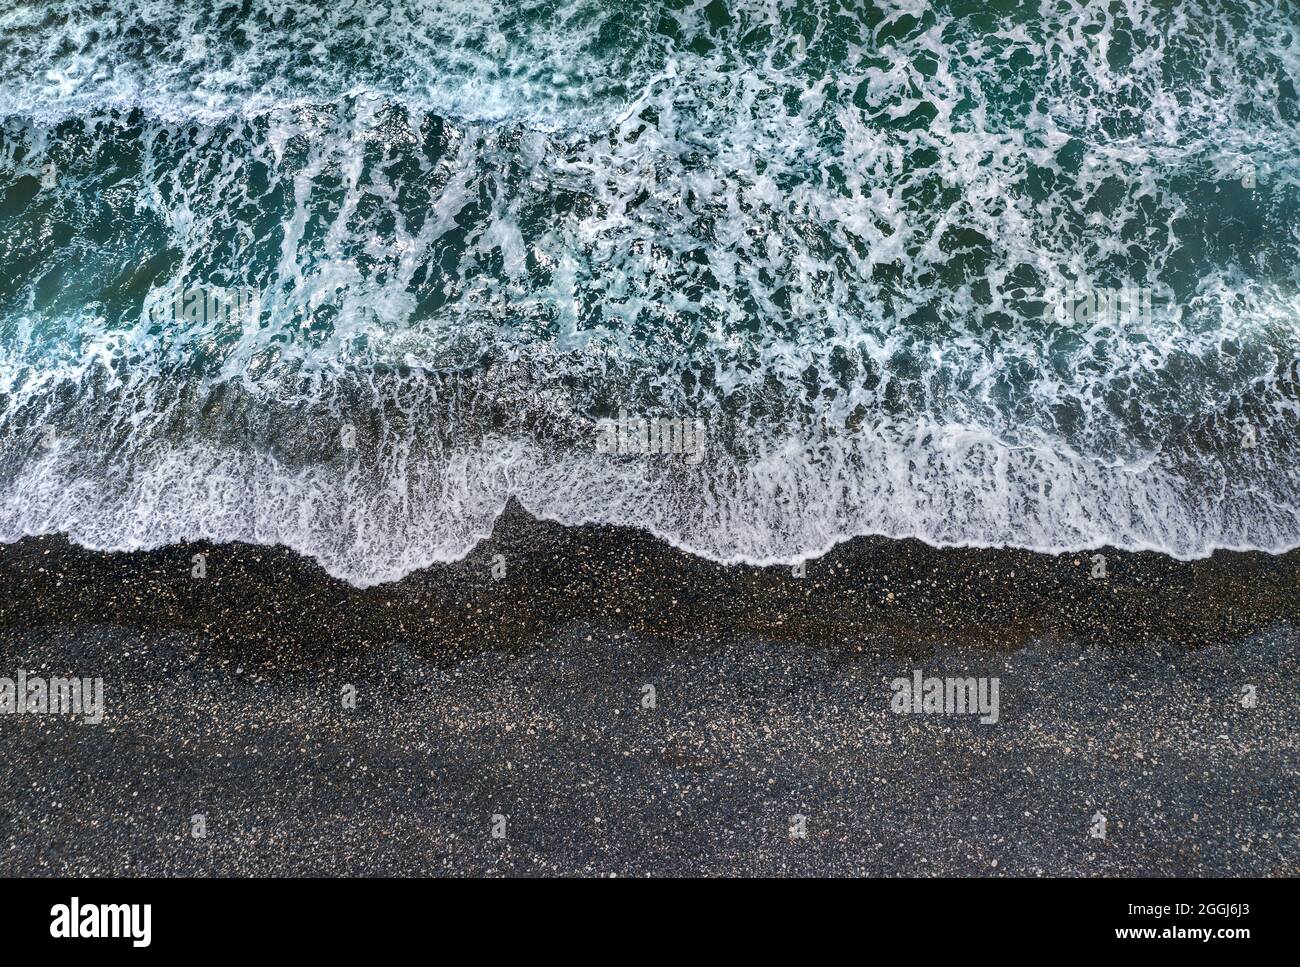 Stormy green waves with white sea foam breaking on dark sandy beach, view from directly above Stock Photo